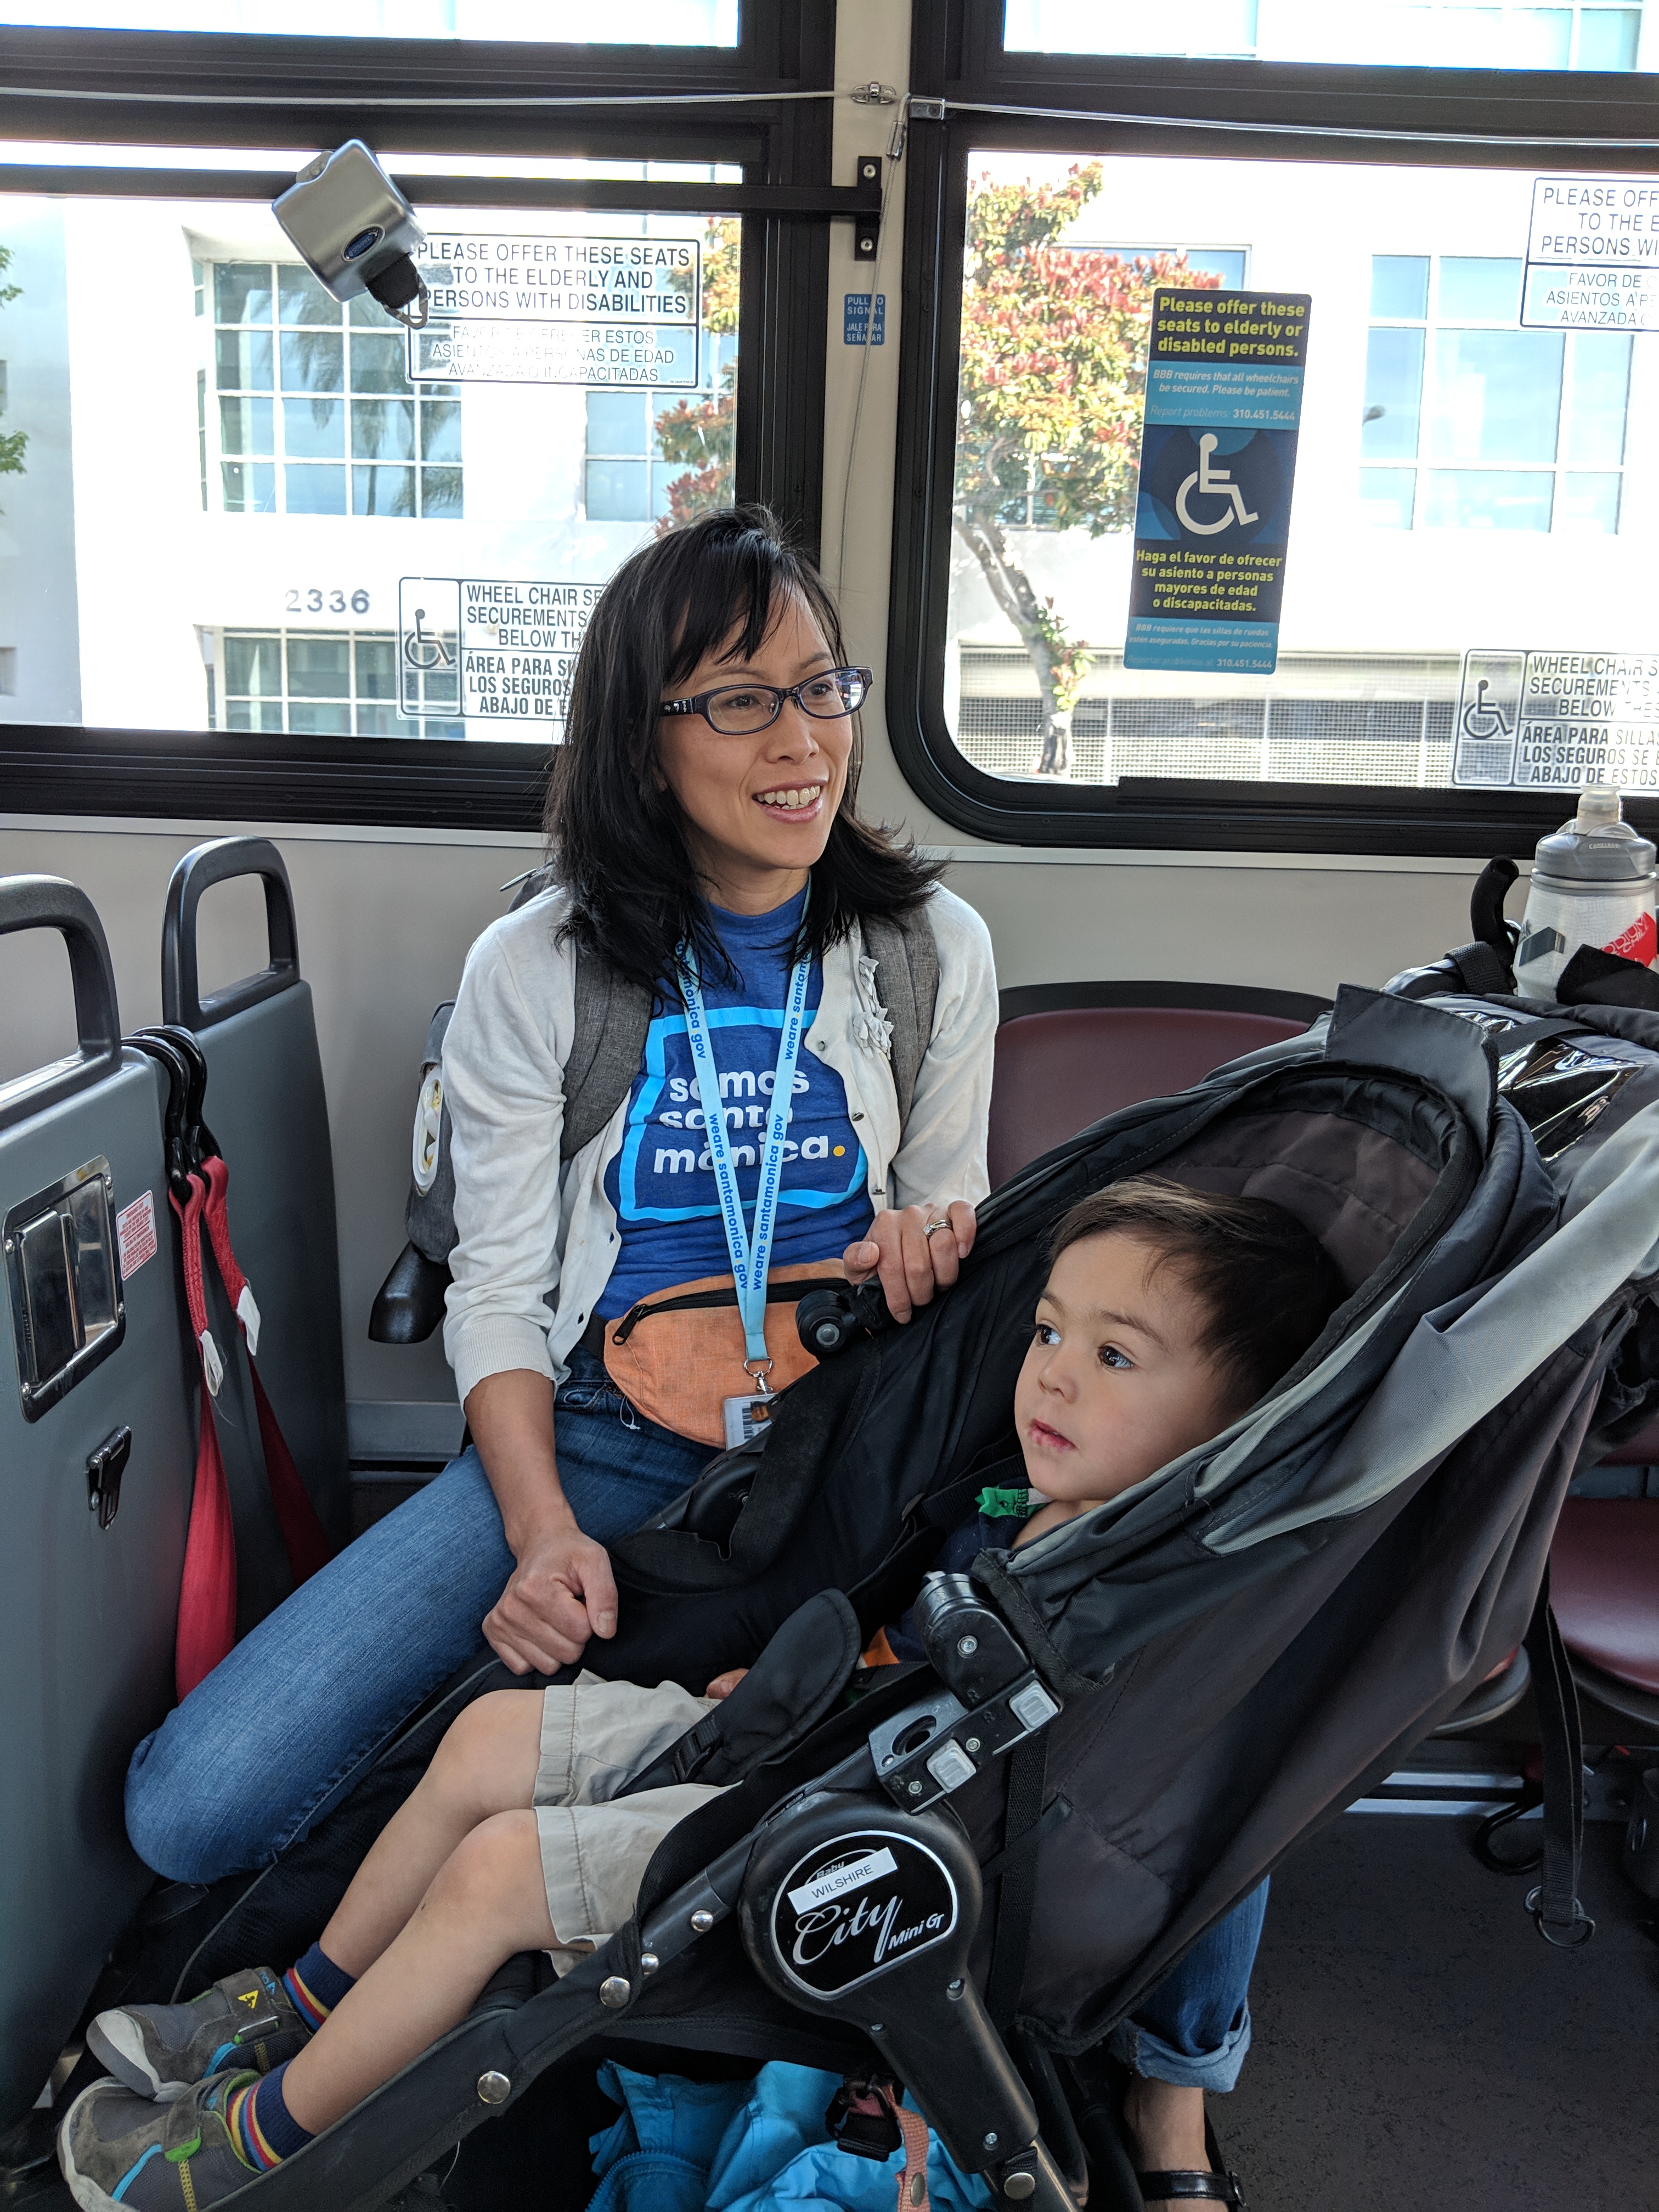 Customer is shown holding onto her stroller while the bus is in motion.